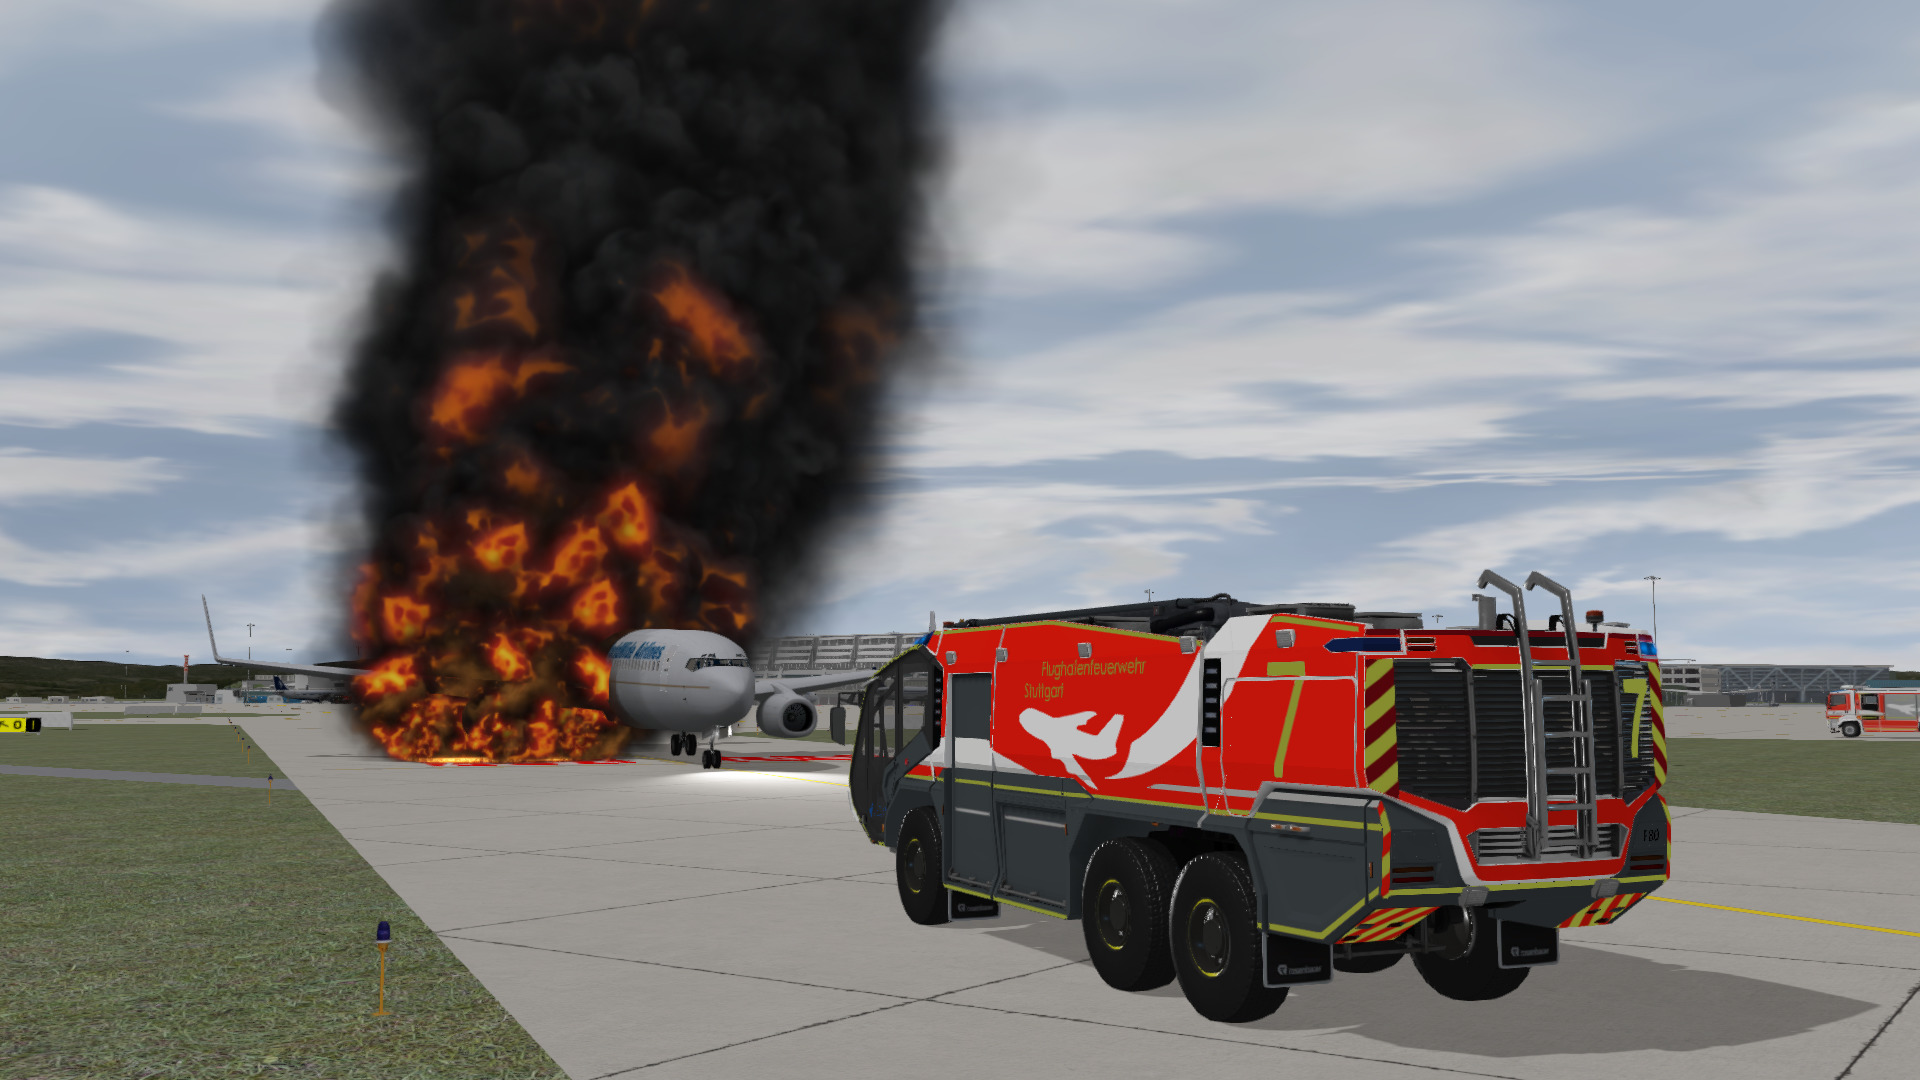 Tactical ARFF positioning training in responding to a fuel fire underneath a 737 in ADMS.